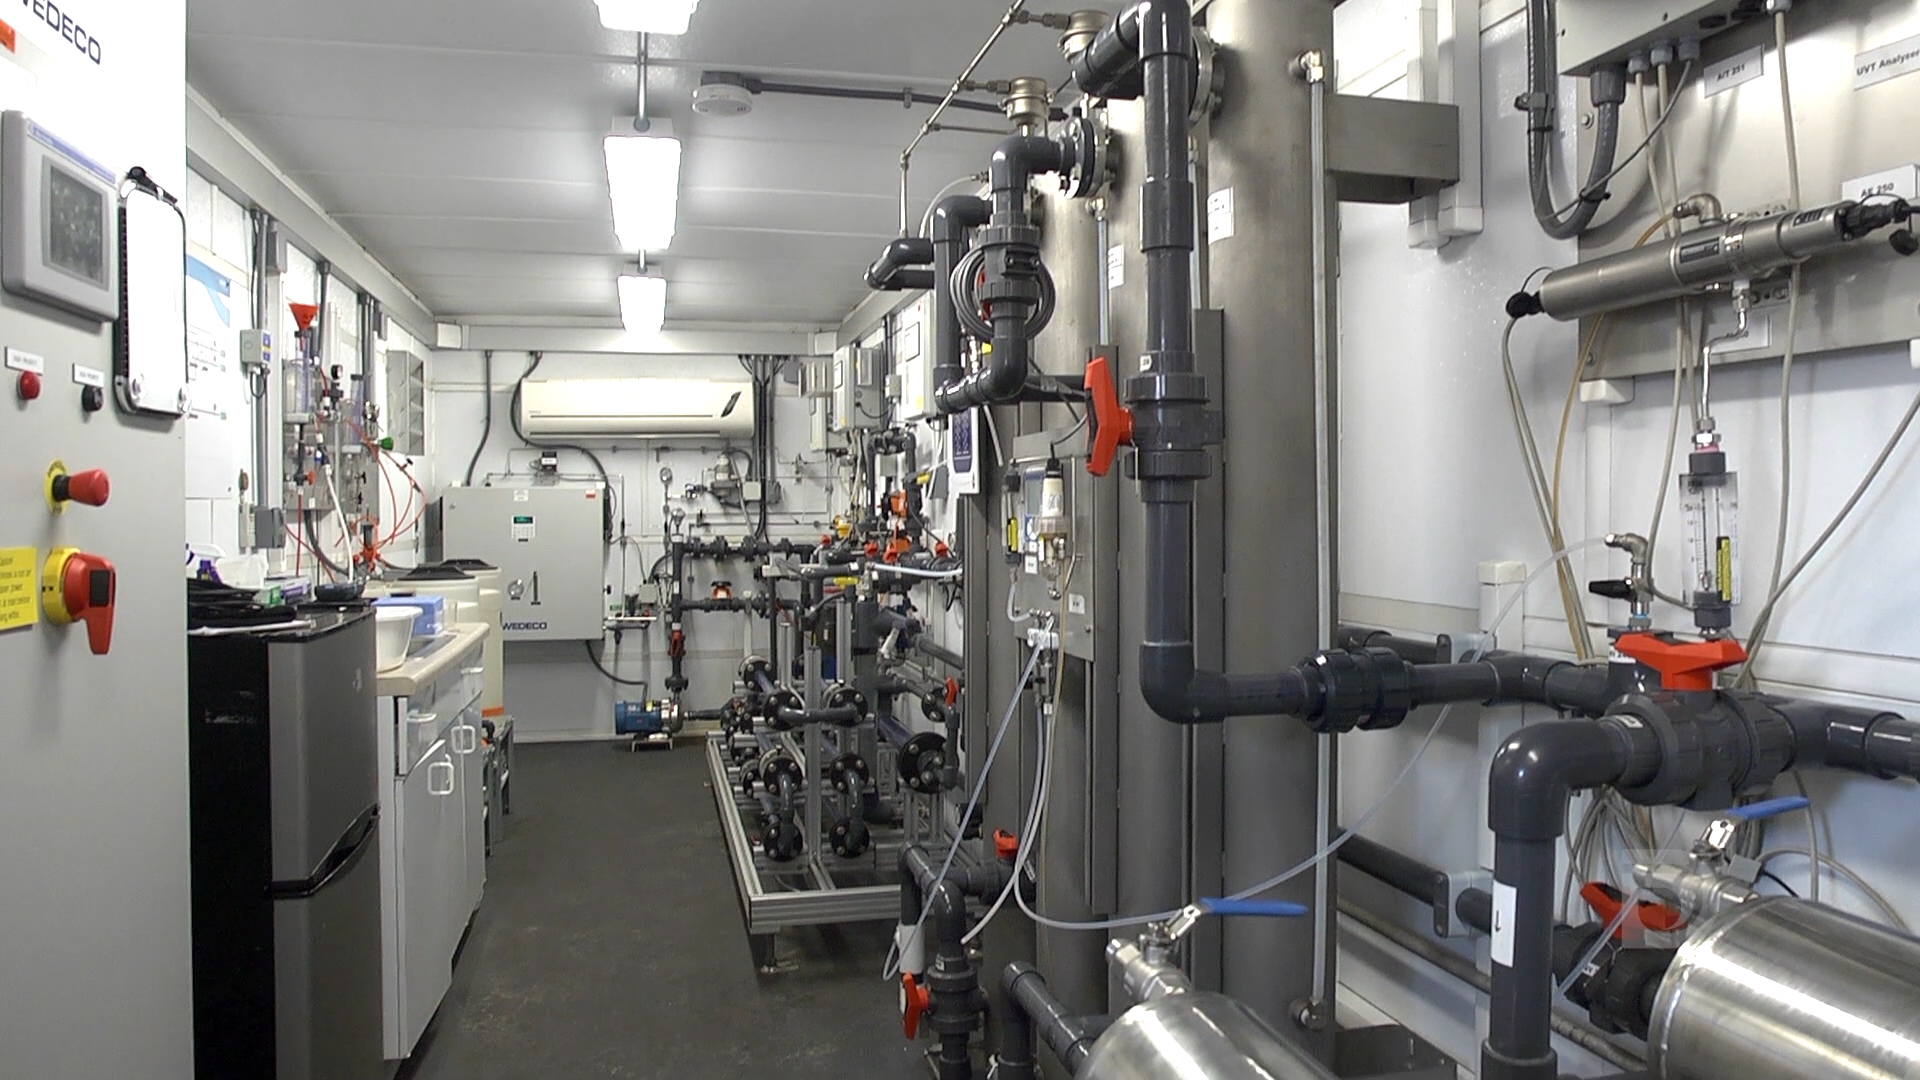 The PureWater Colorado Demonstration Project uses advanced technology to purify wastewater so it's safe to drink.